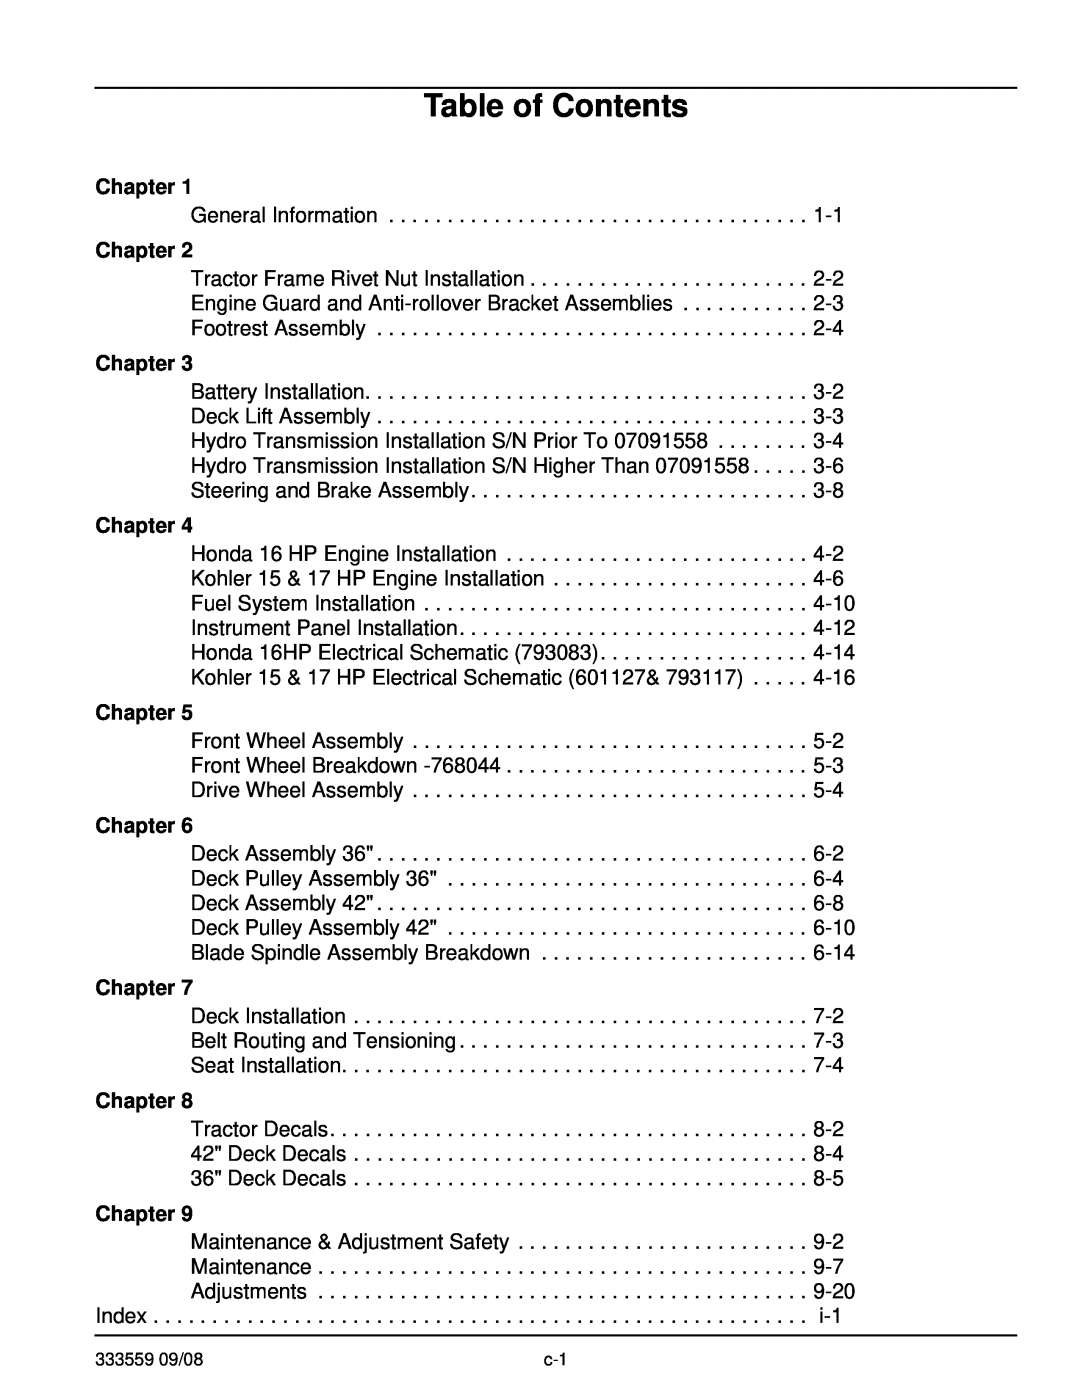 Hustler Turf none manual Table of Contents, Chapter 